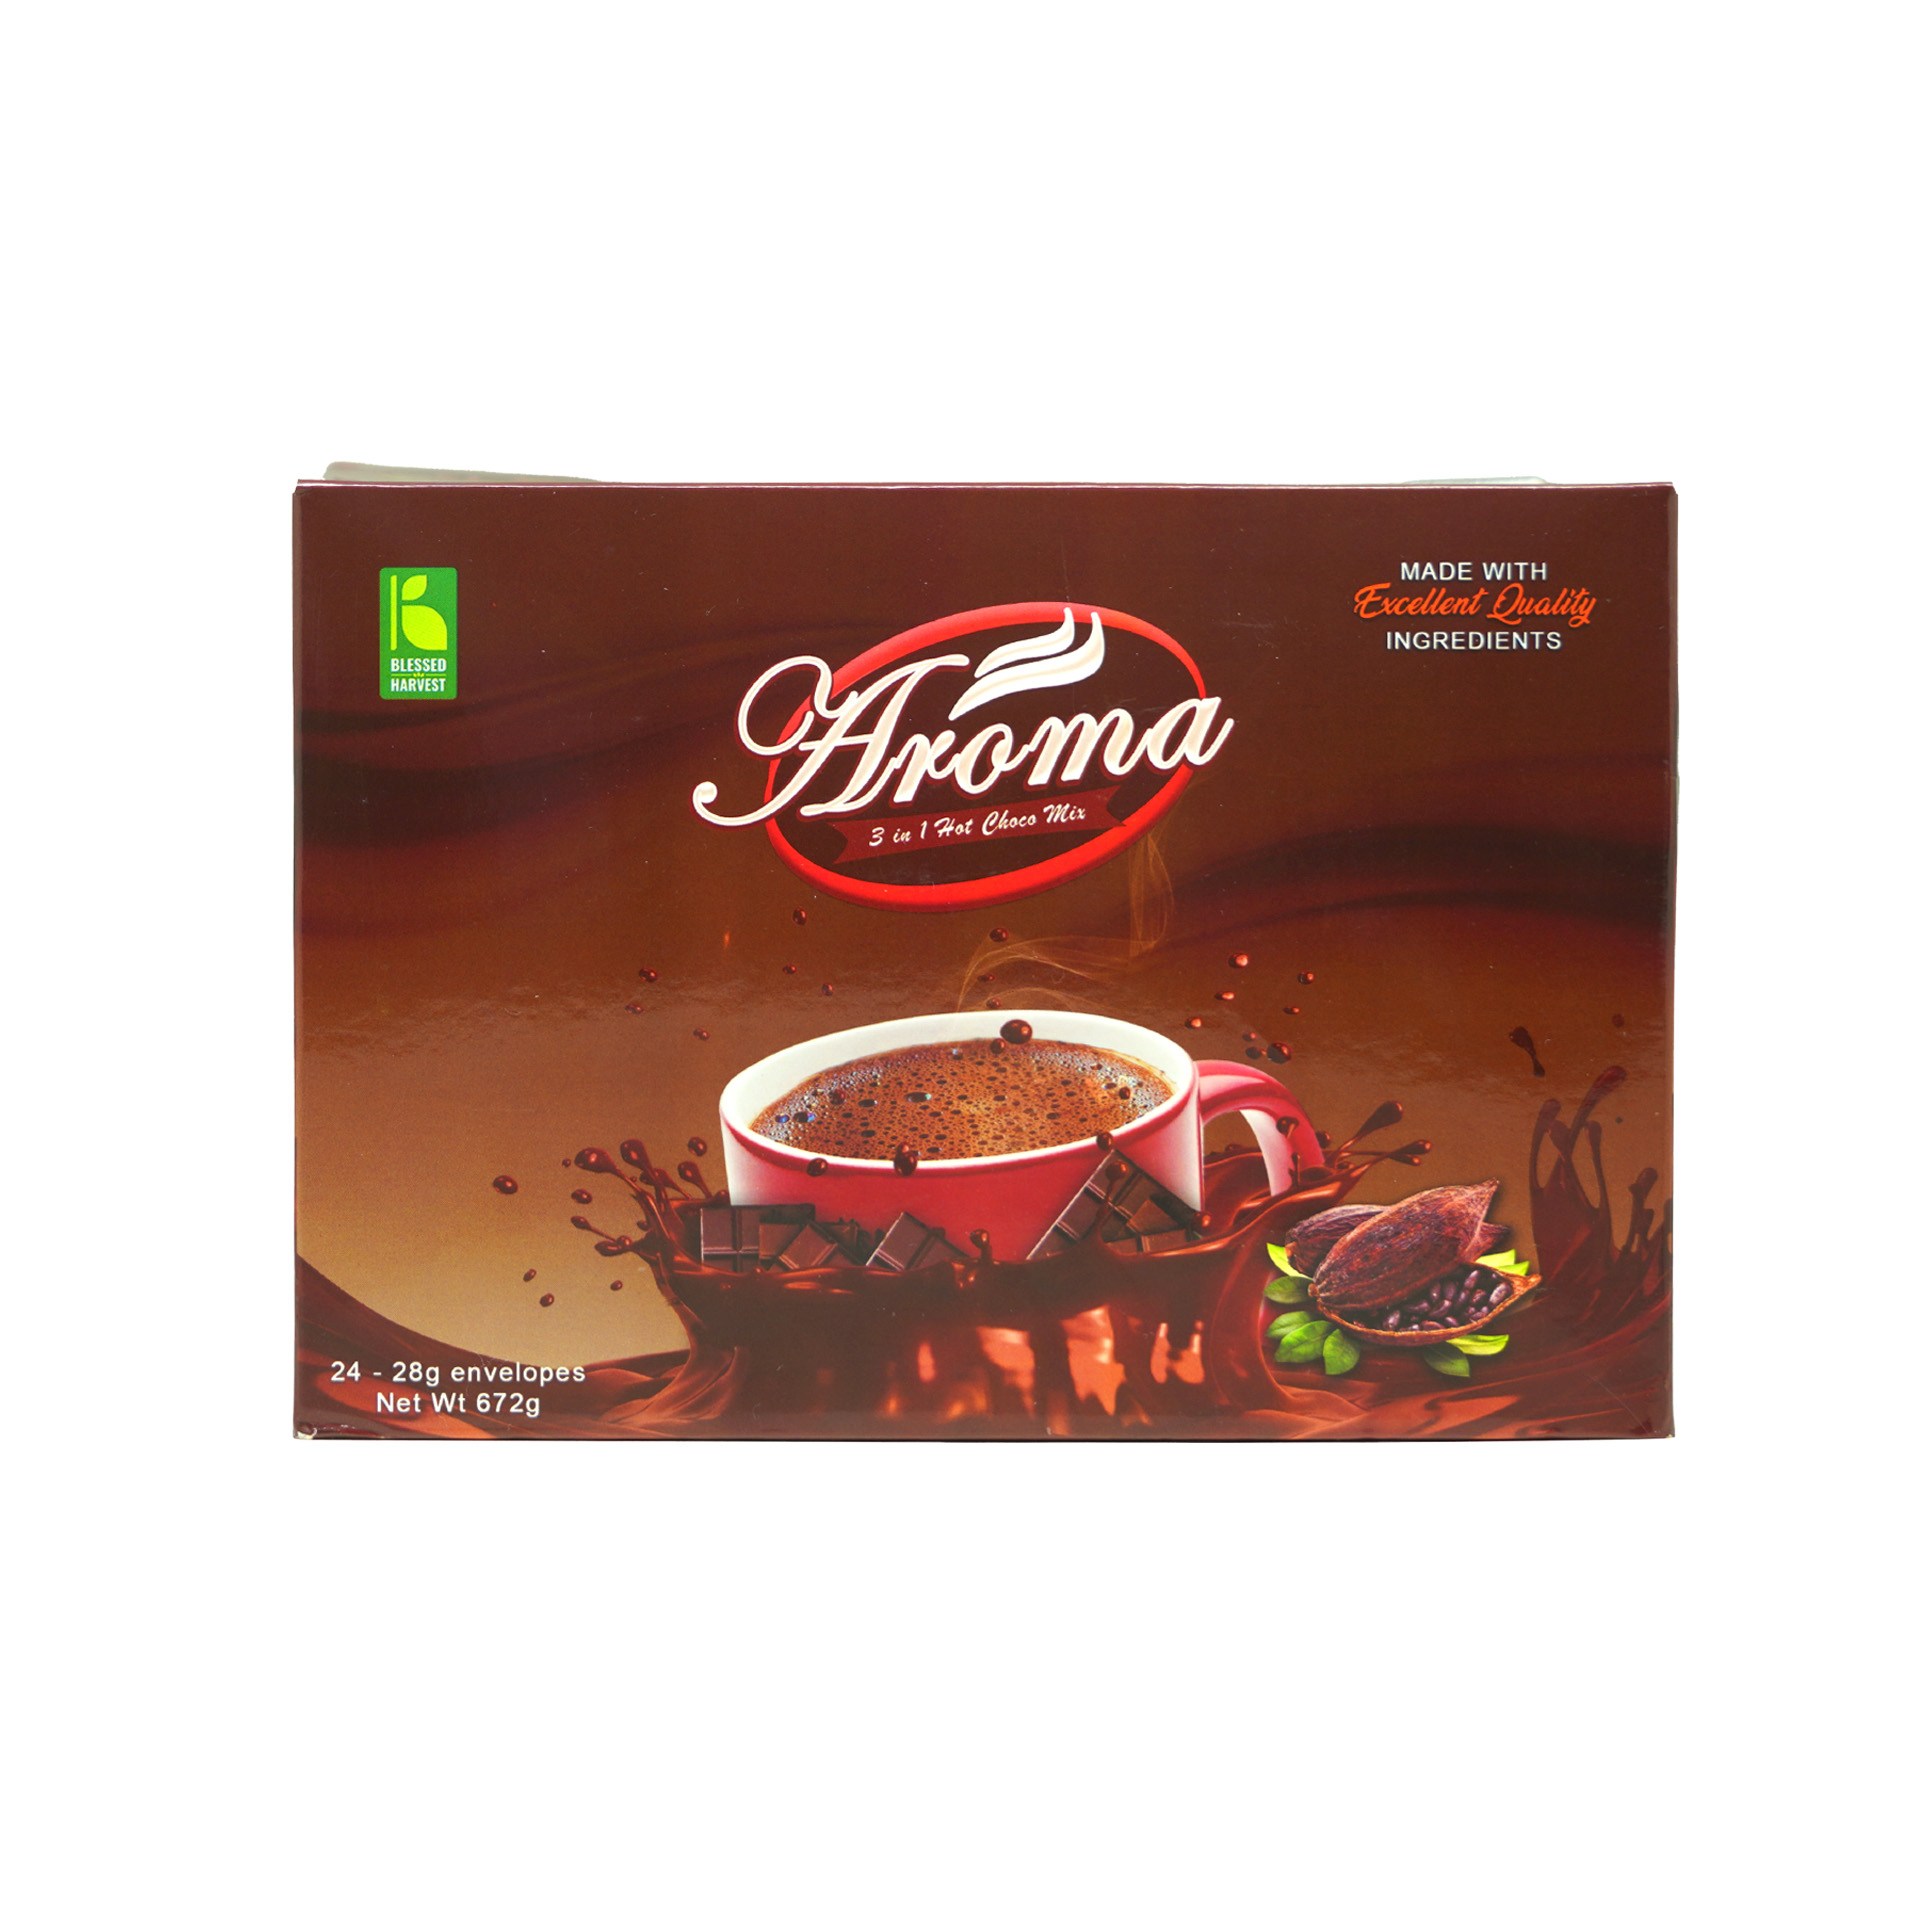 Blessed Harvest Aroma 3 in 1 Hot Choco Mix (24 packs, 28g each)